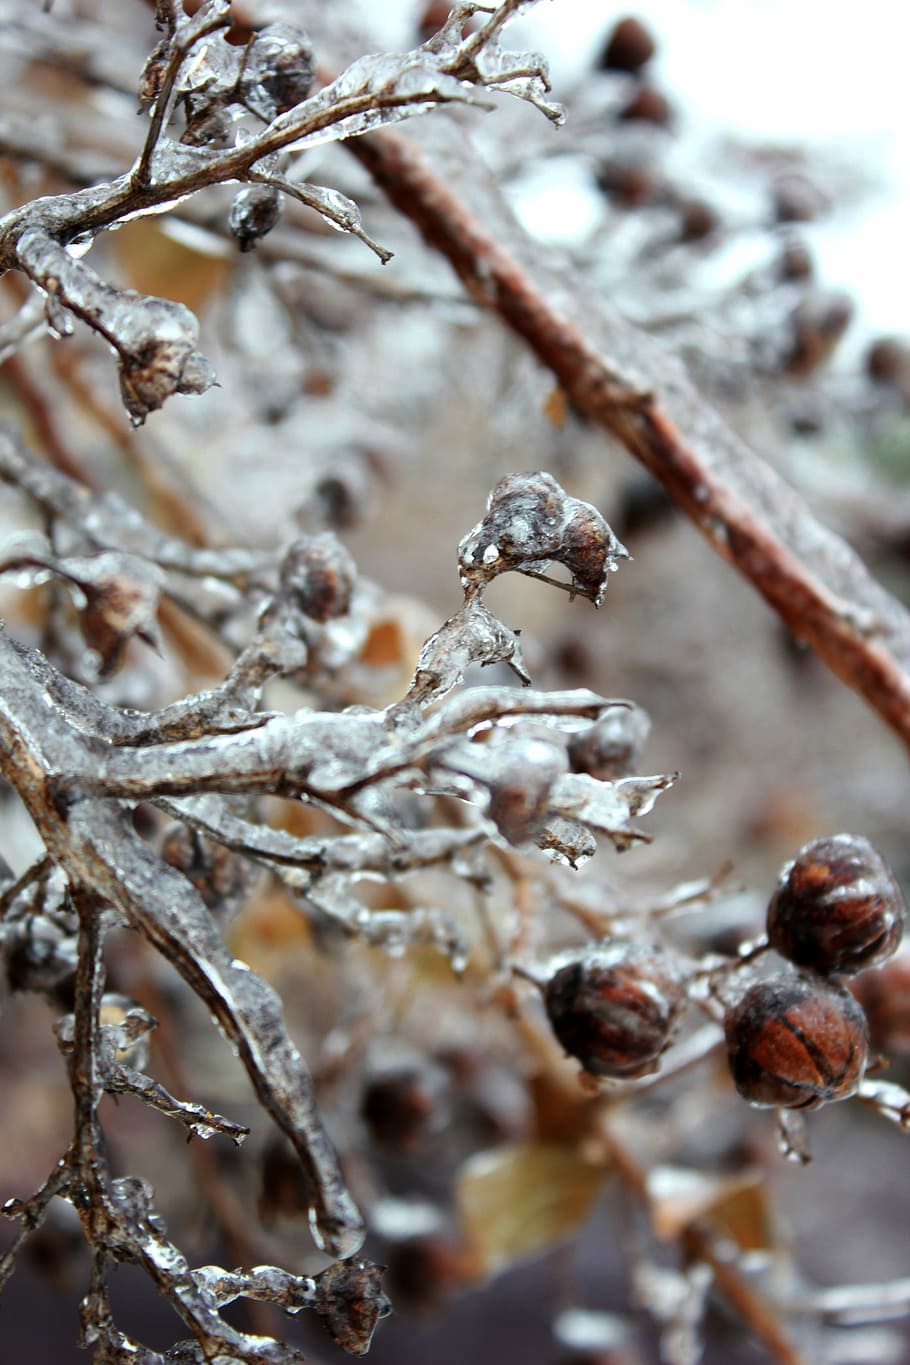 Ice, Icy, Frozen, Winter, Freezing, zing, zing rain, cold temperature, close-up, nature